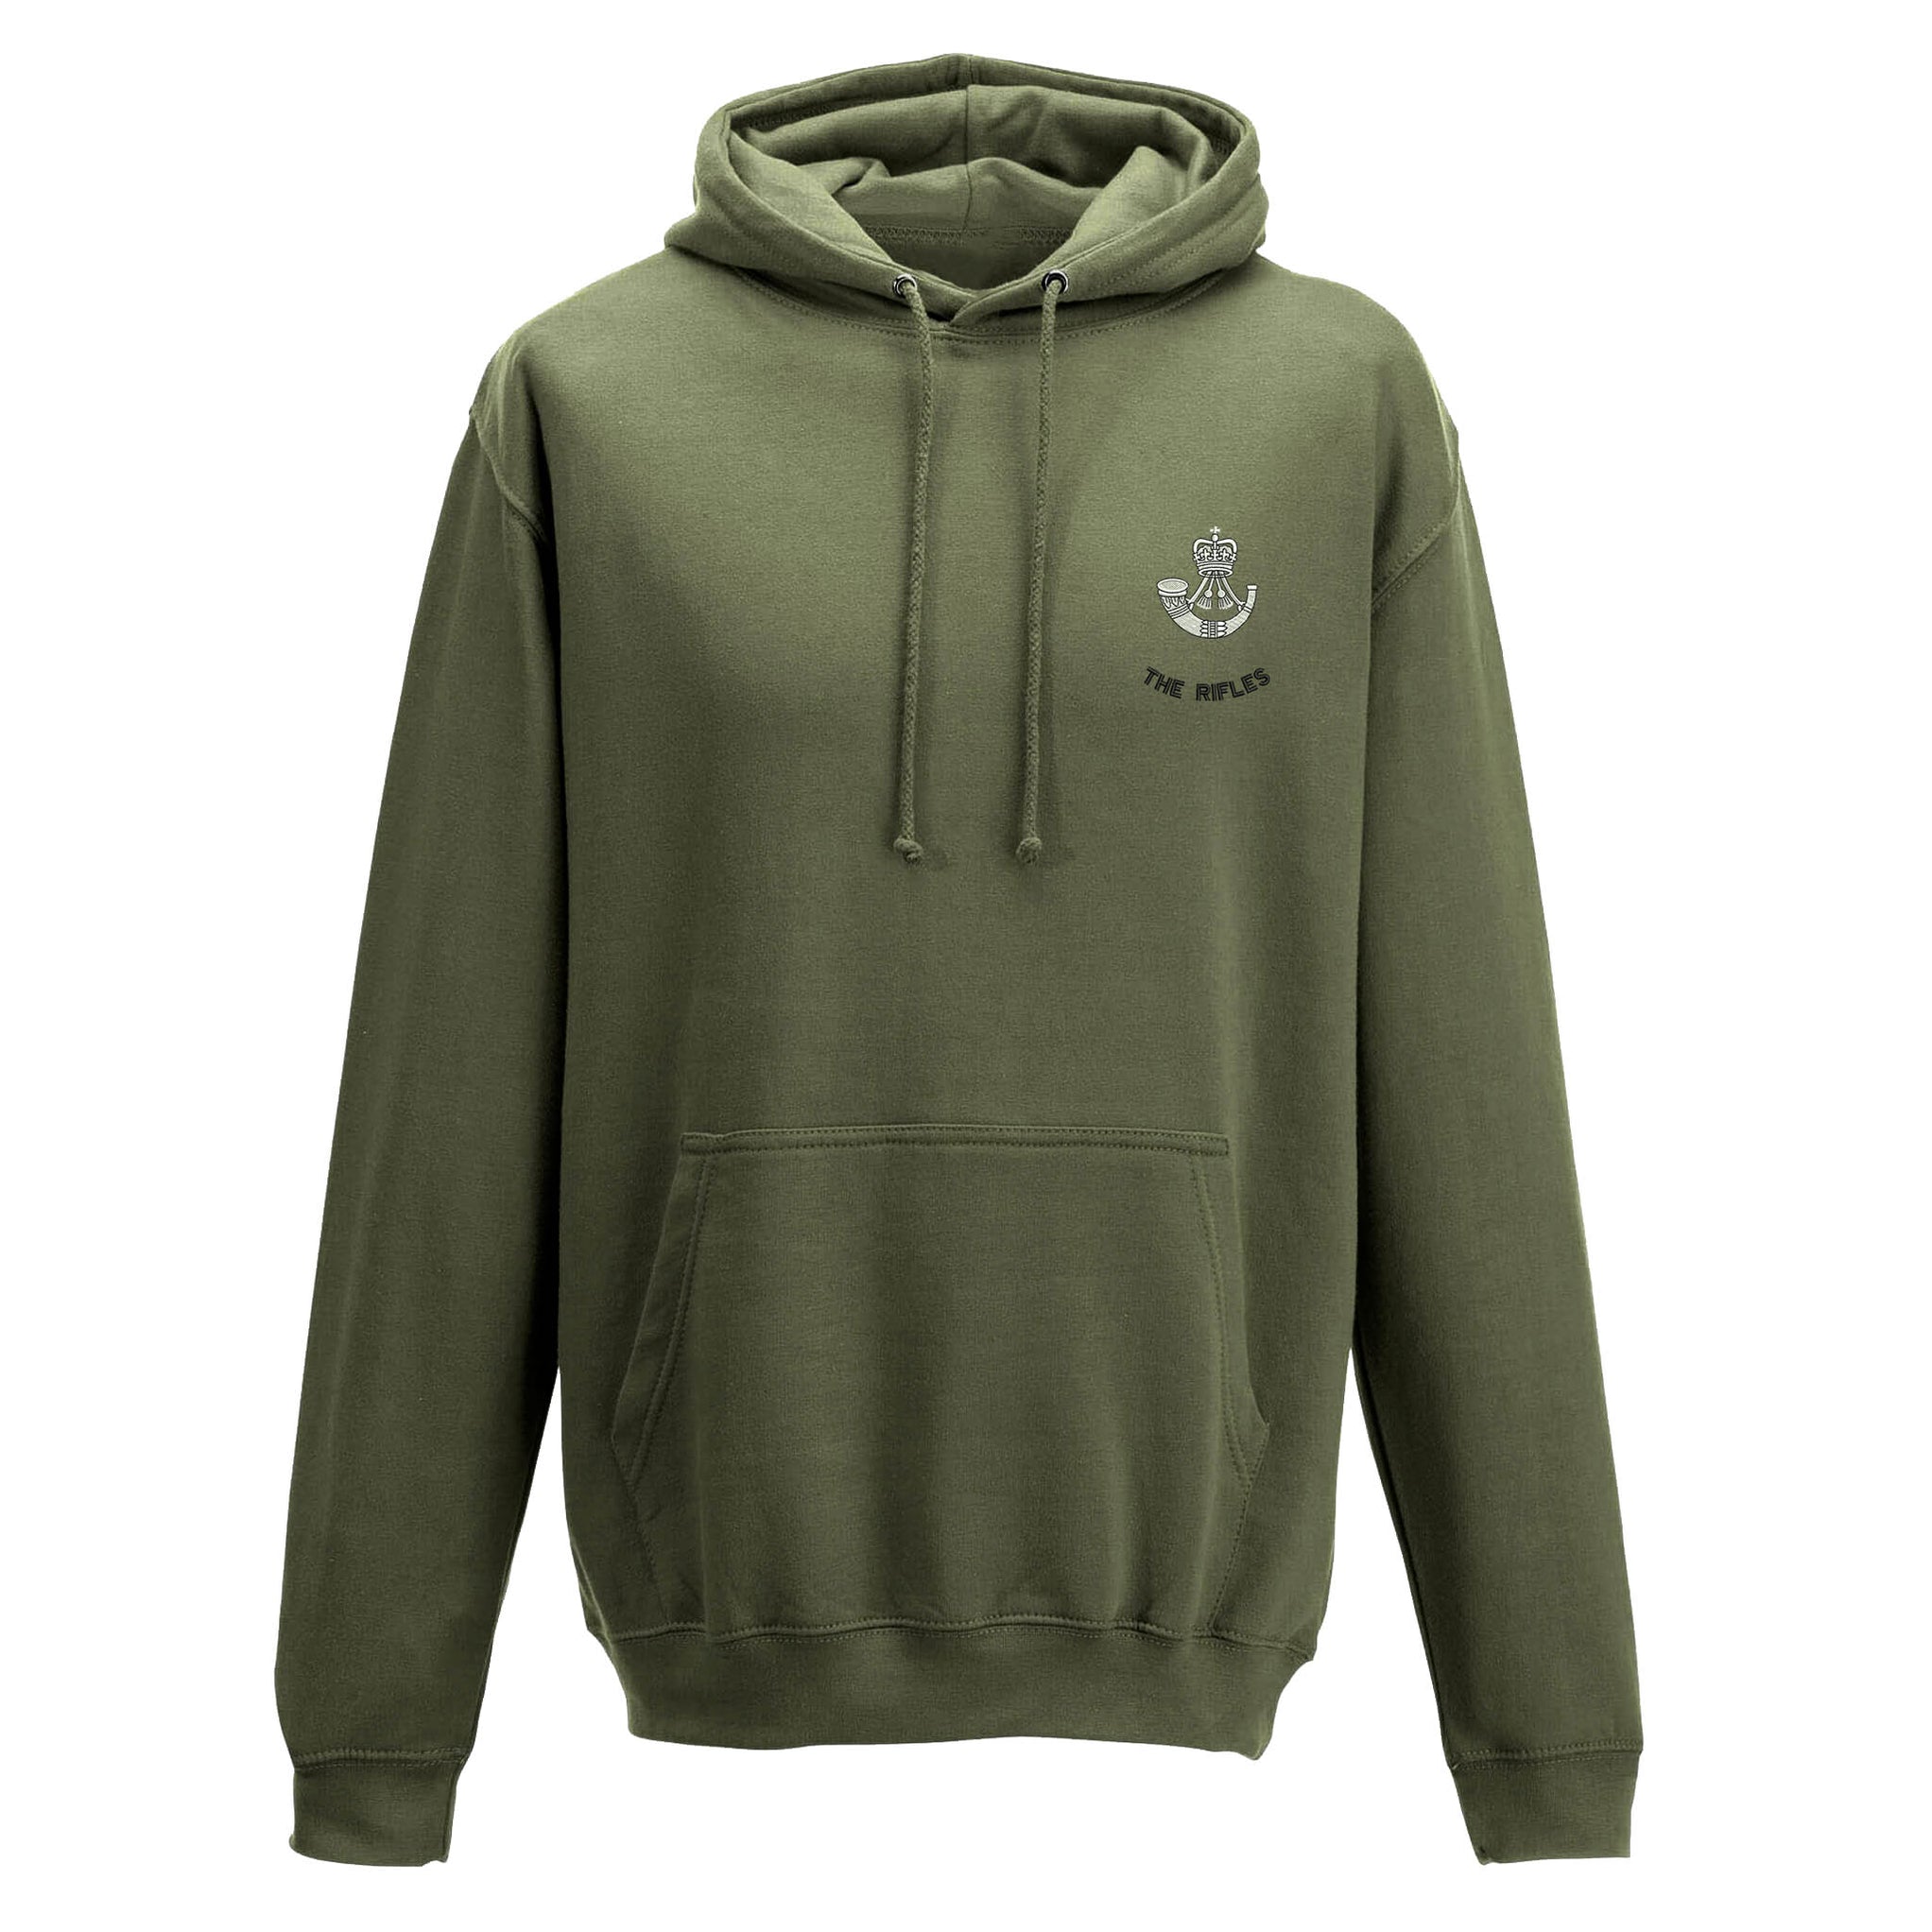 The Rifles Hoodie — The Military Store